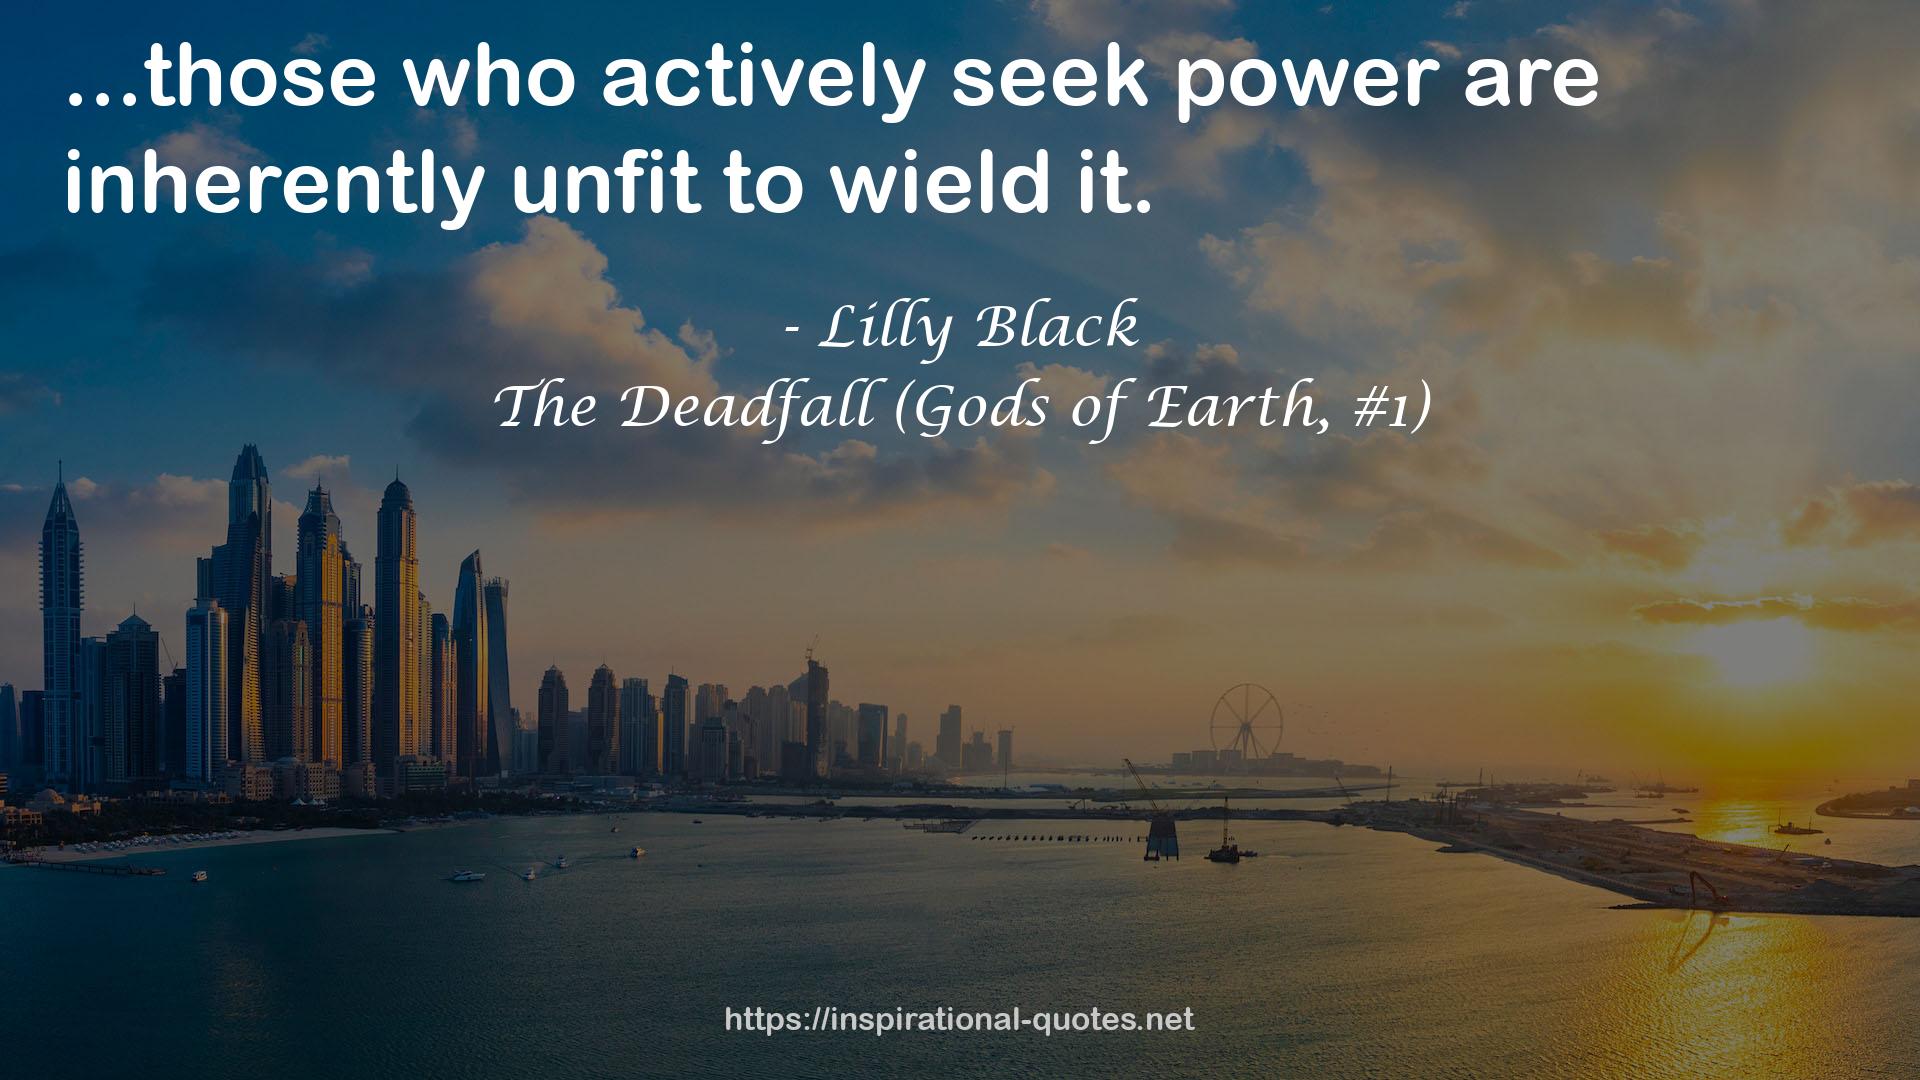 The Deadfall (Gods of Earth, #1) QUOTES